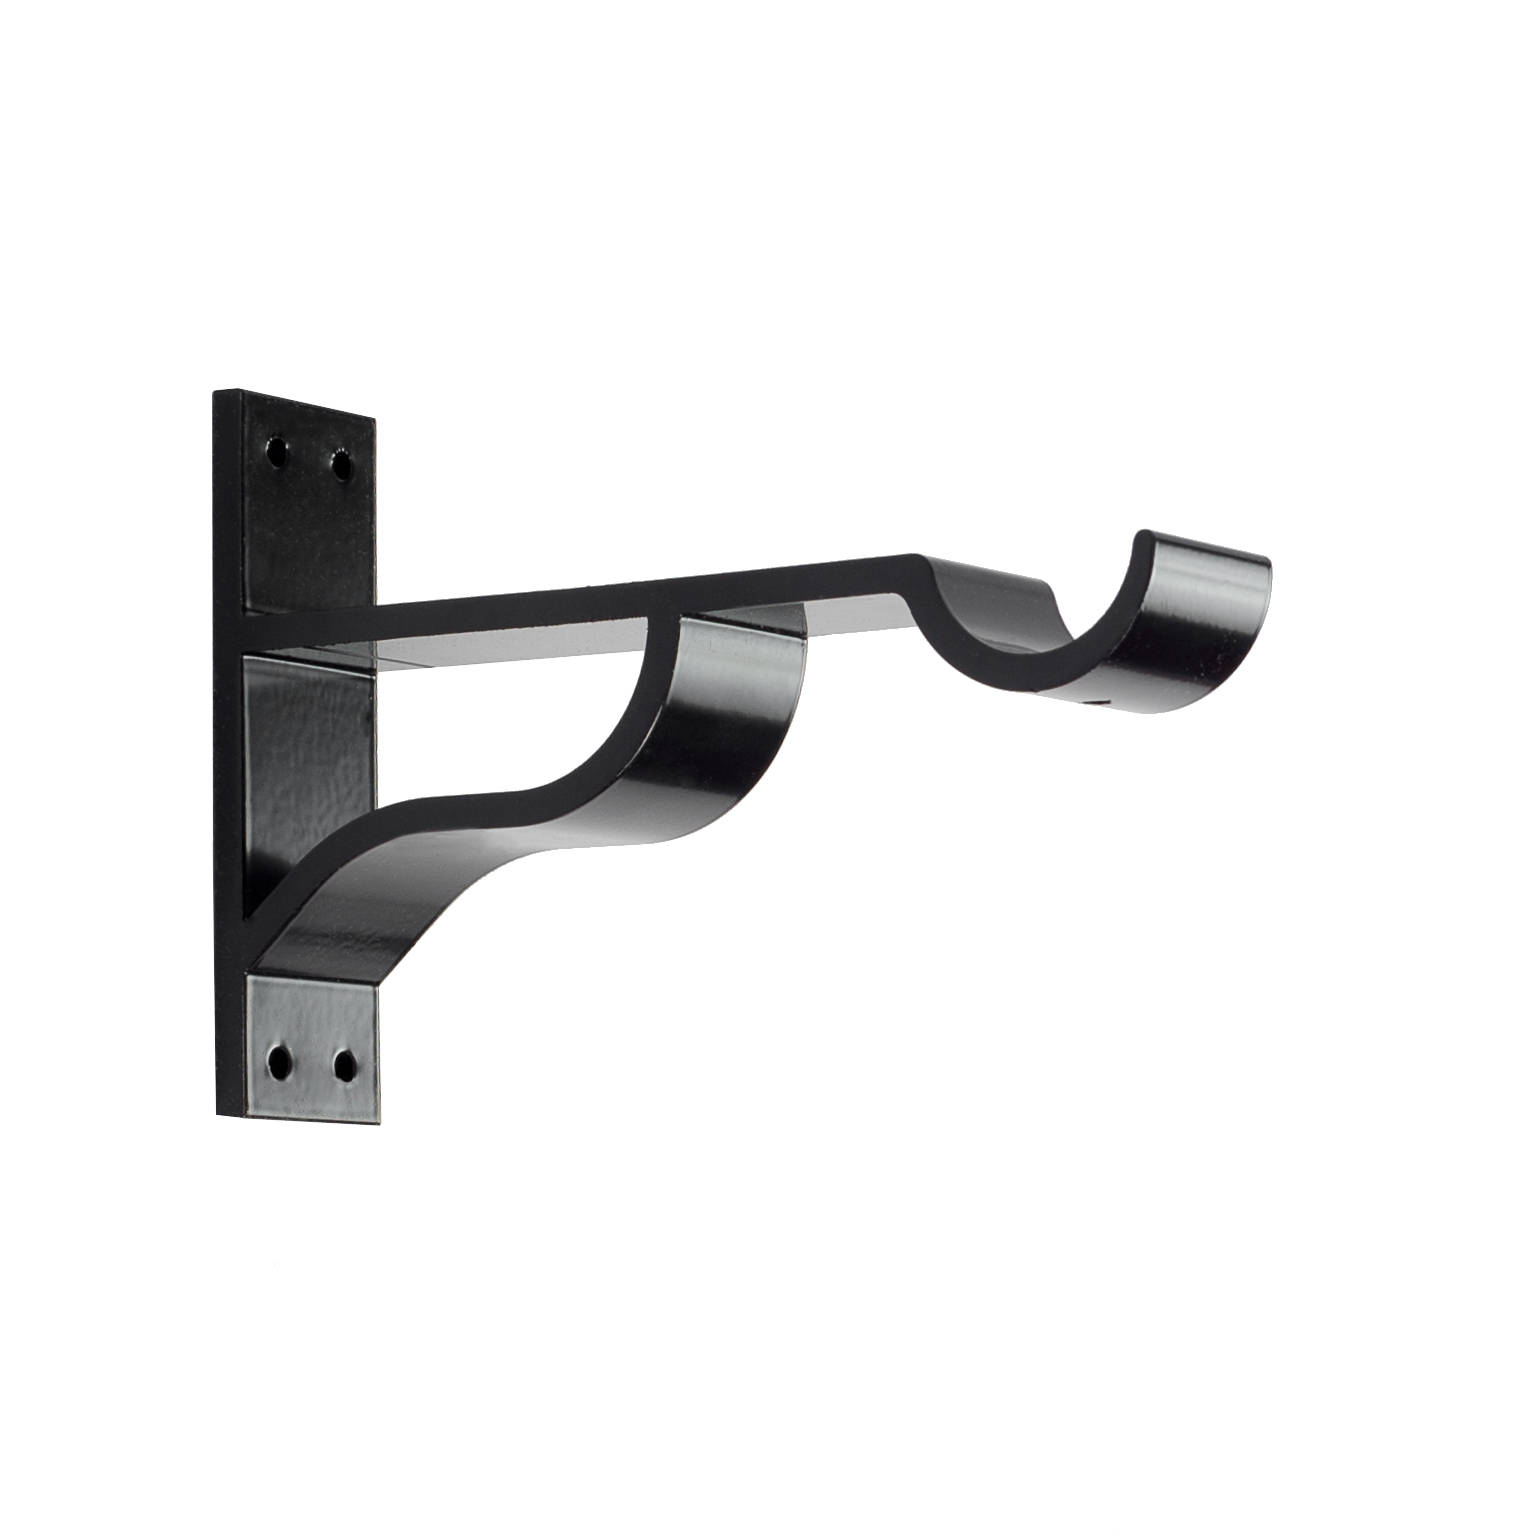 Ballet Barre Wall Mounted 1 Metre Brackets attached & Plugs/Screws Supplied 